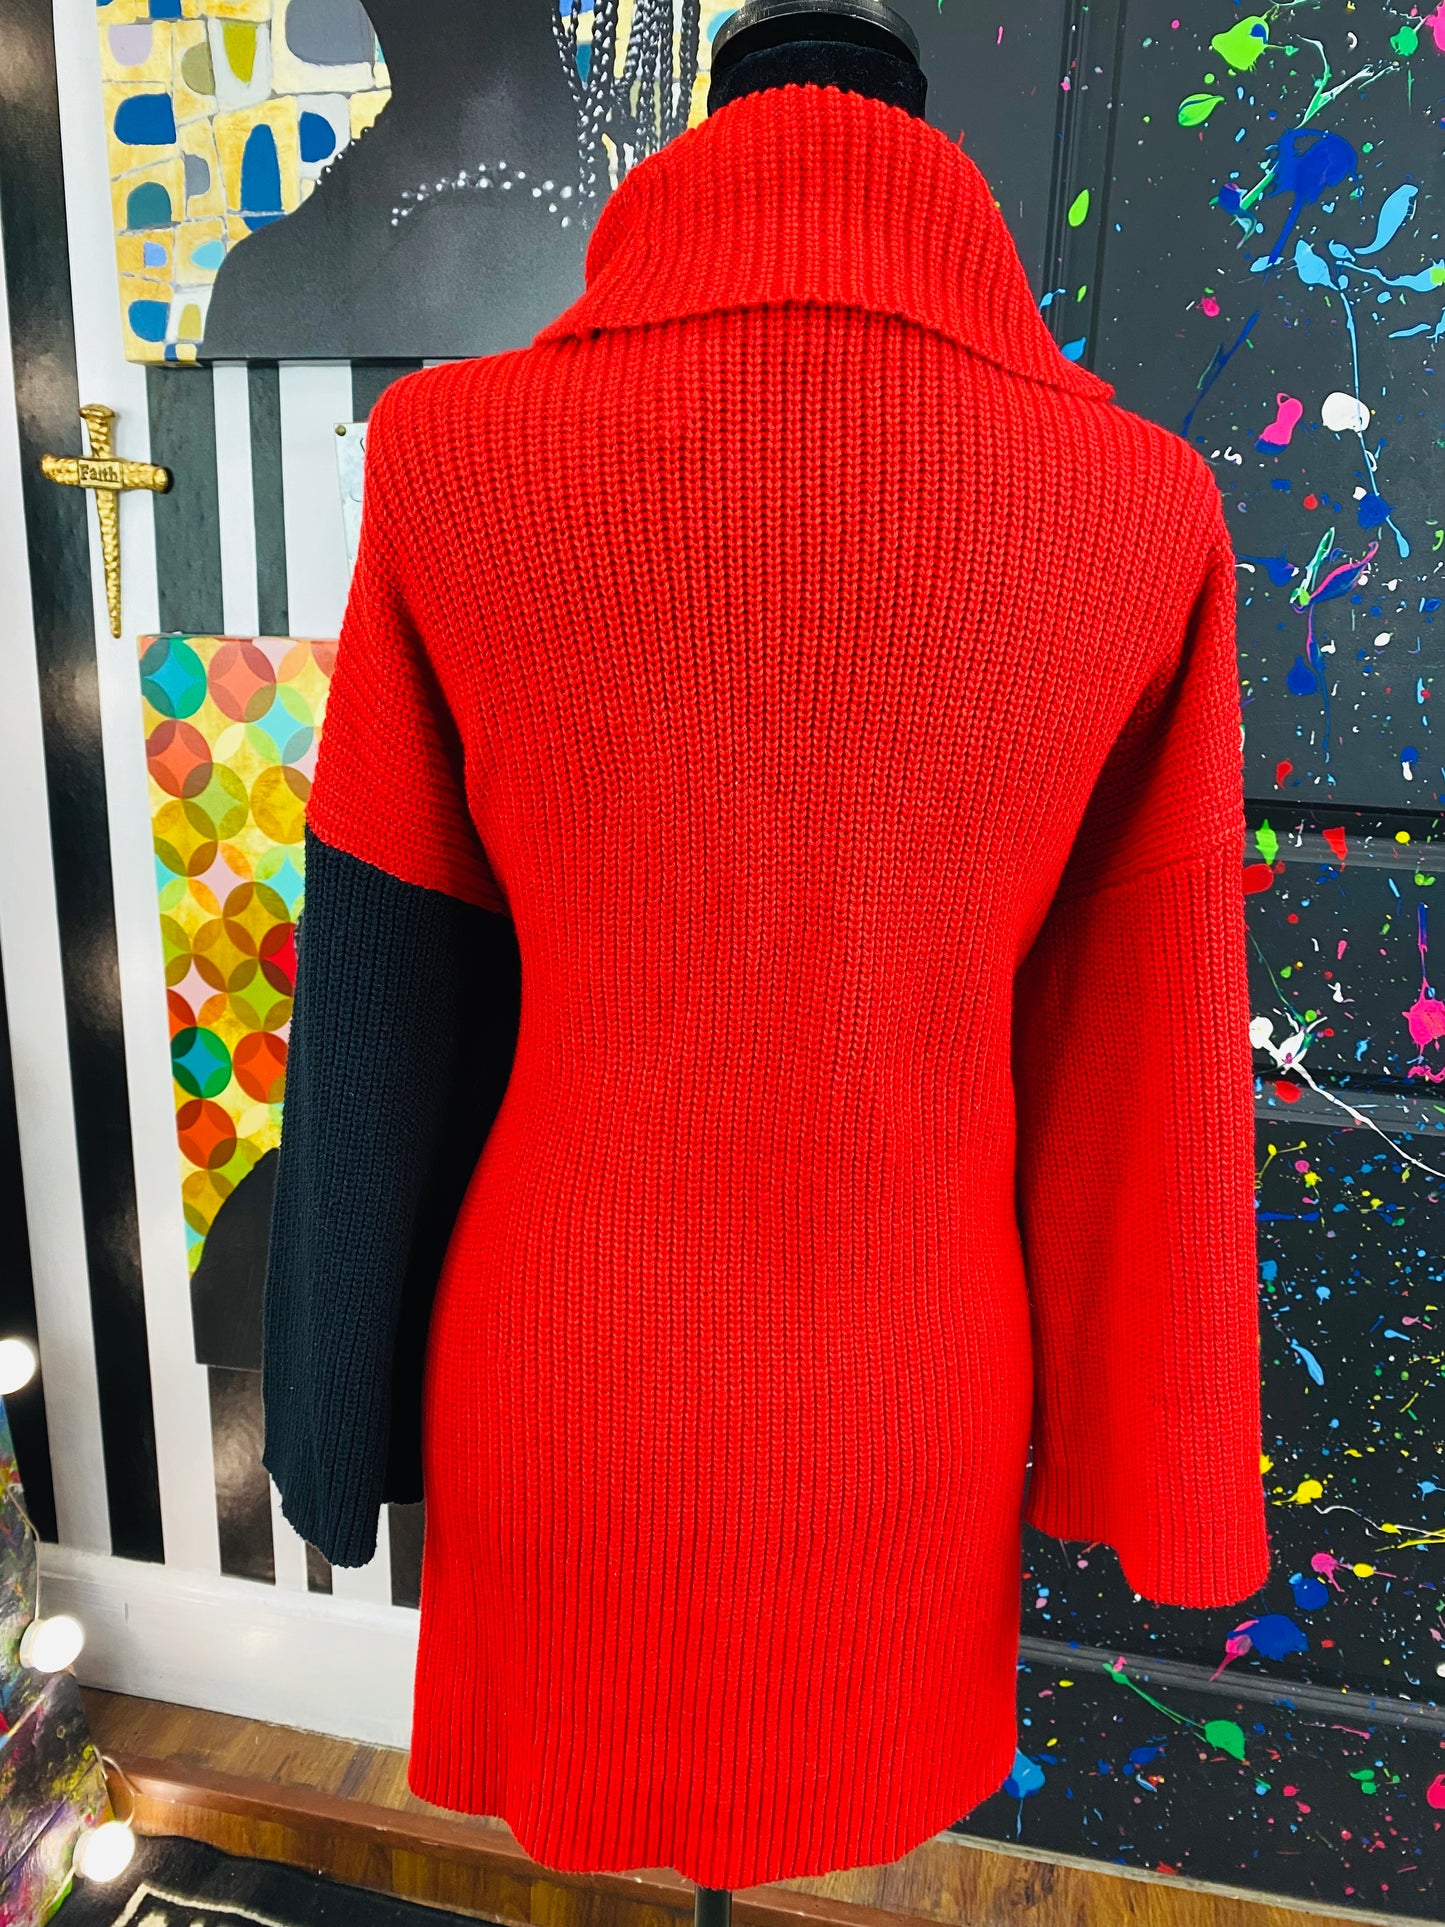 Vintage Black and Red Sweater